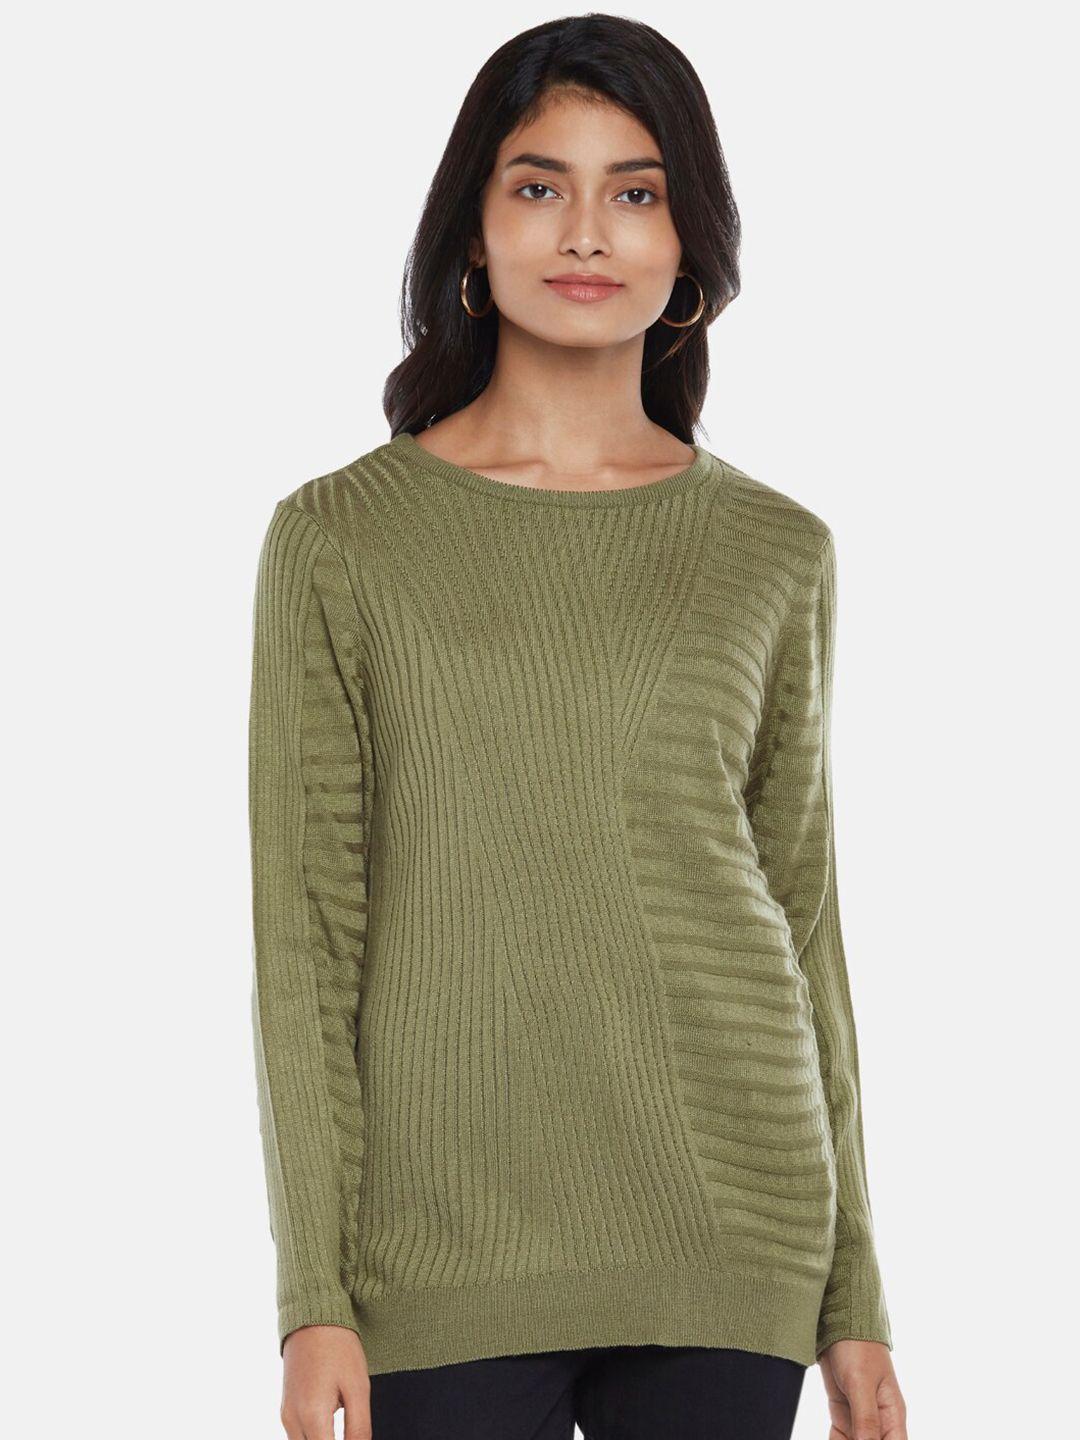 honey by pantaloons women olive green pullover